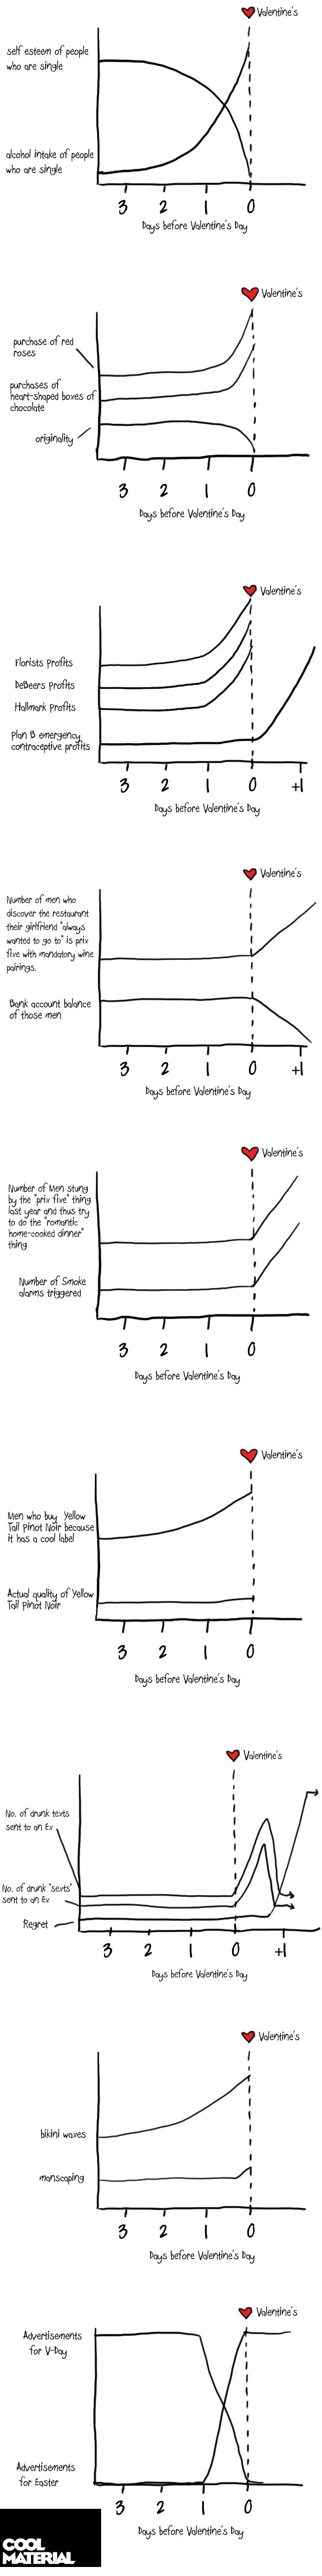 image tagged in funny,relationships,graphs